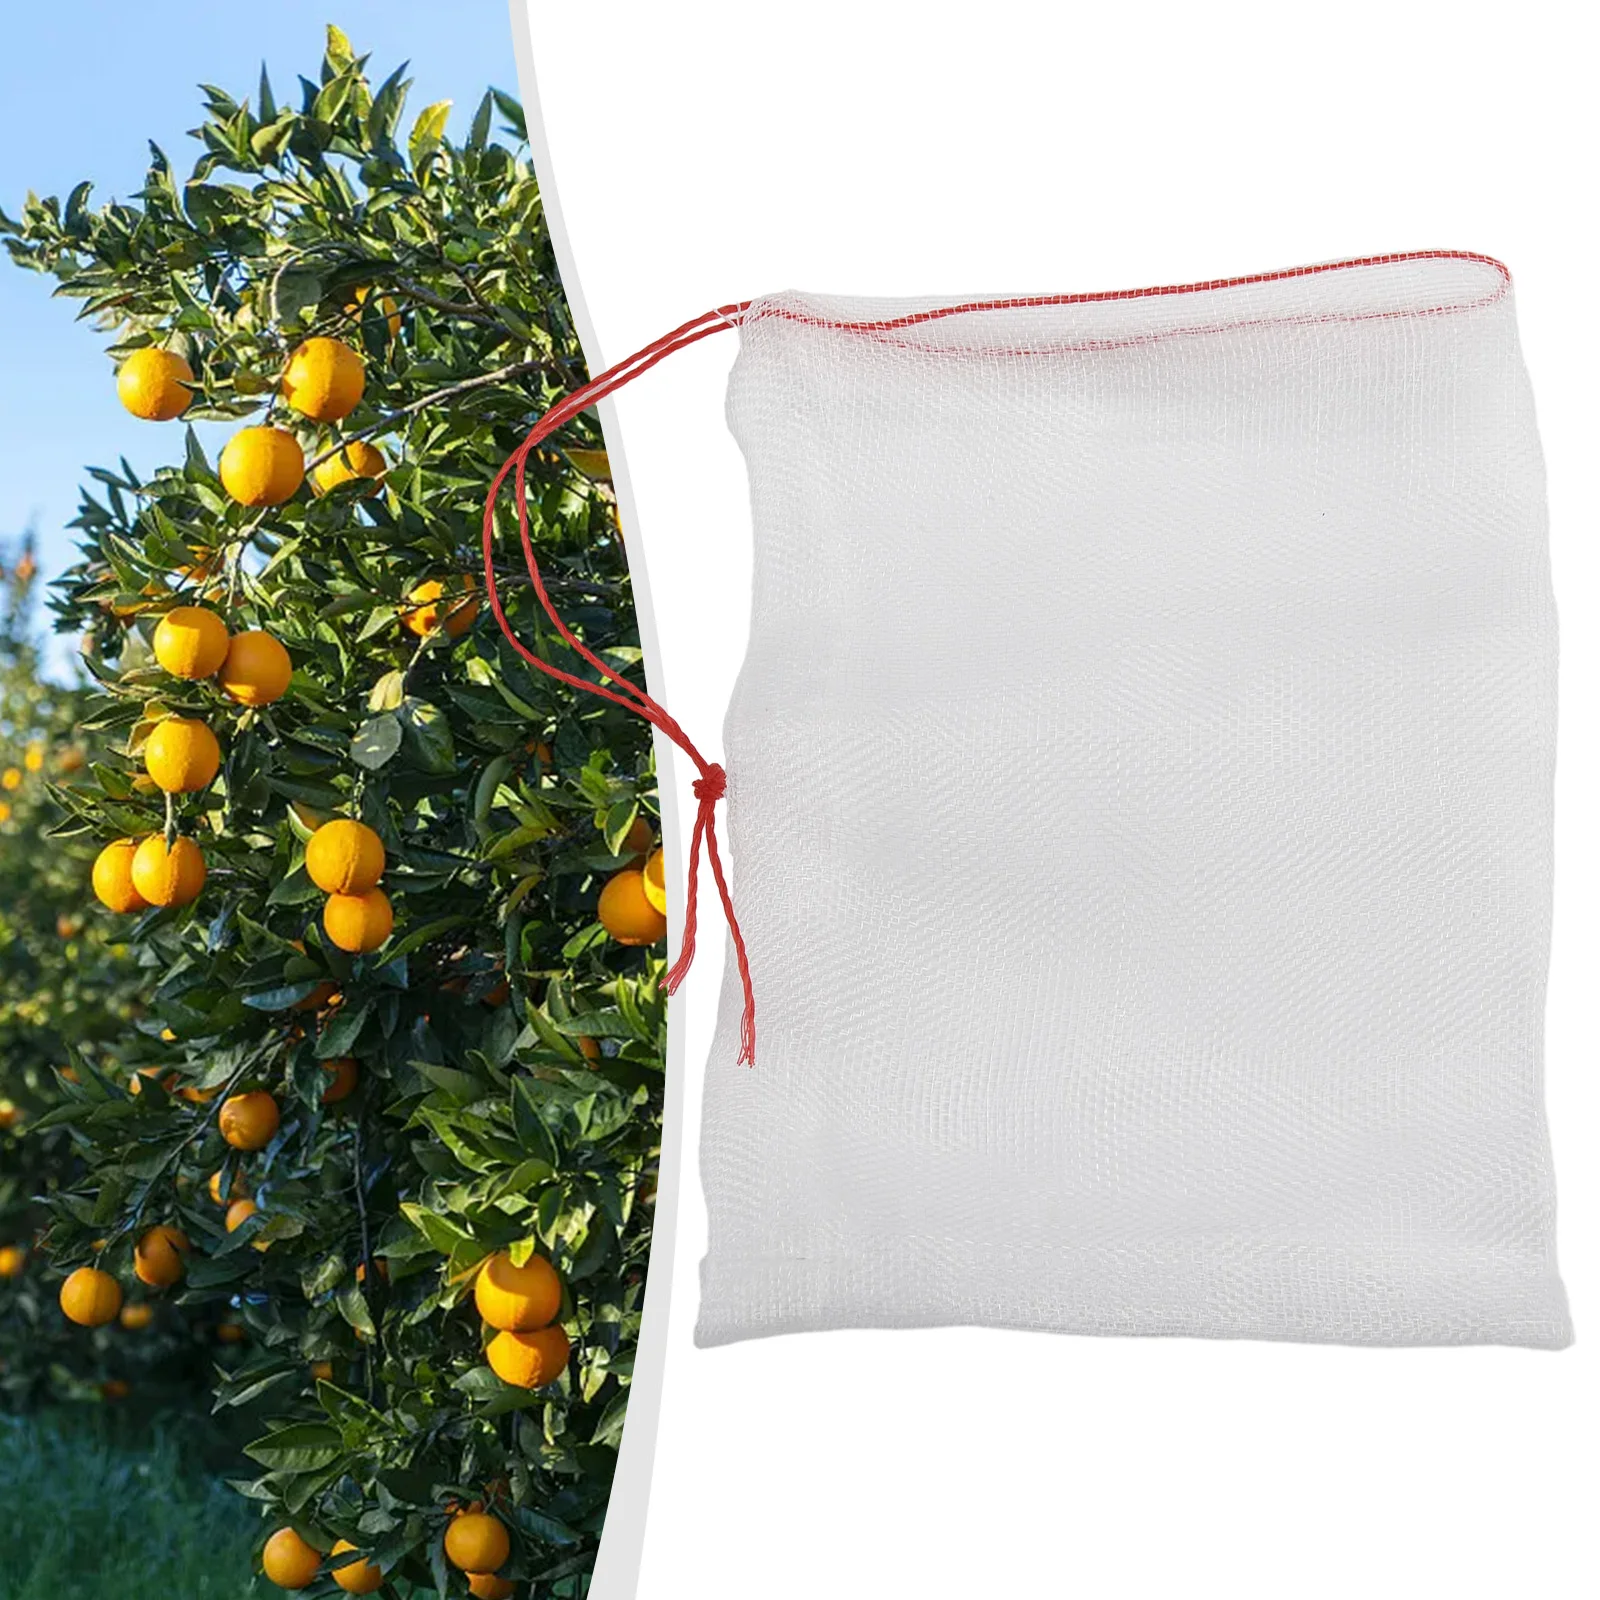 1pc Strawberry Grapes Fruit Grow Bags Netting Mesh Vegetable Plant Protection Bags For Pest Control Anti-Bird Garden Tools